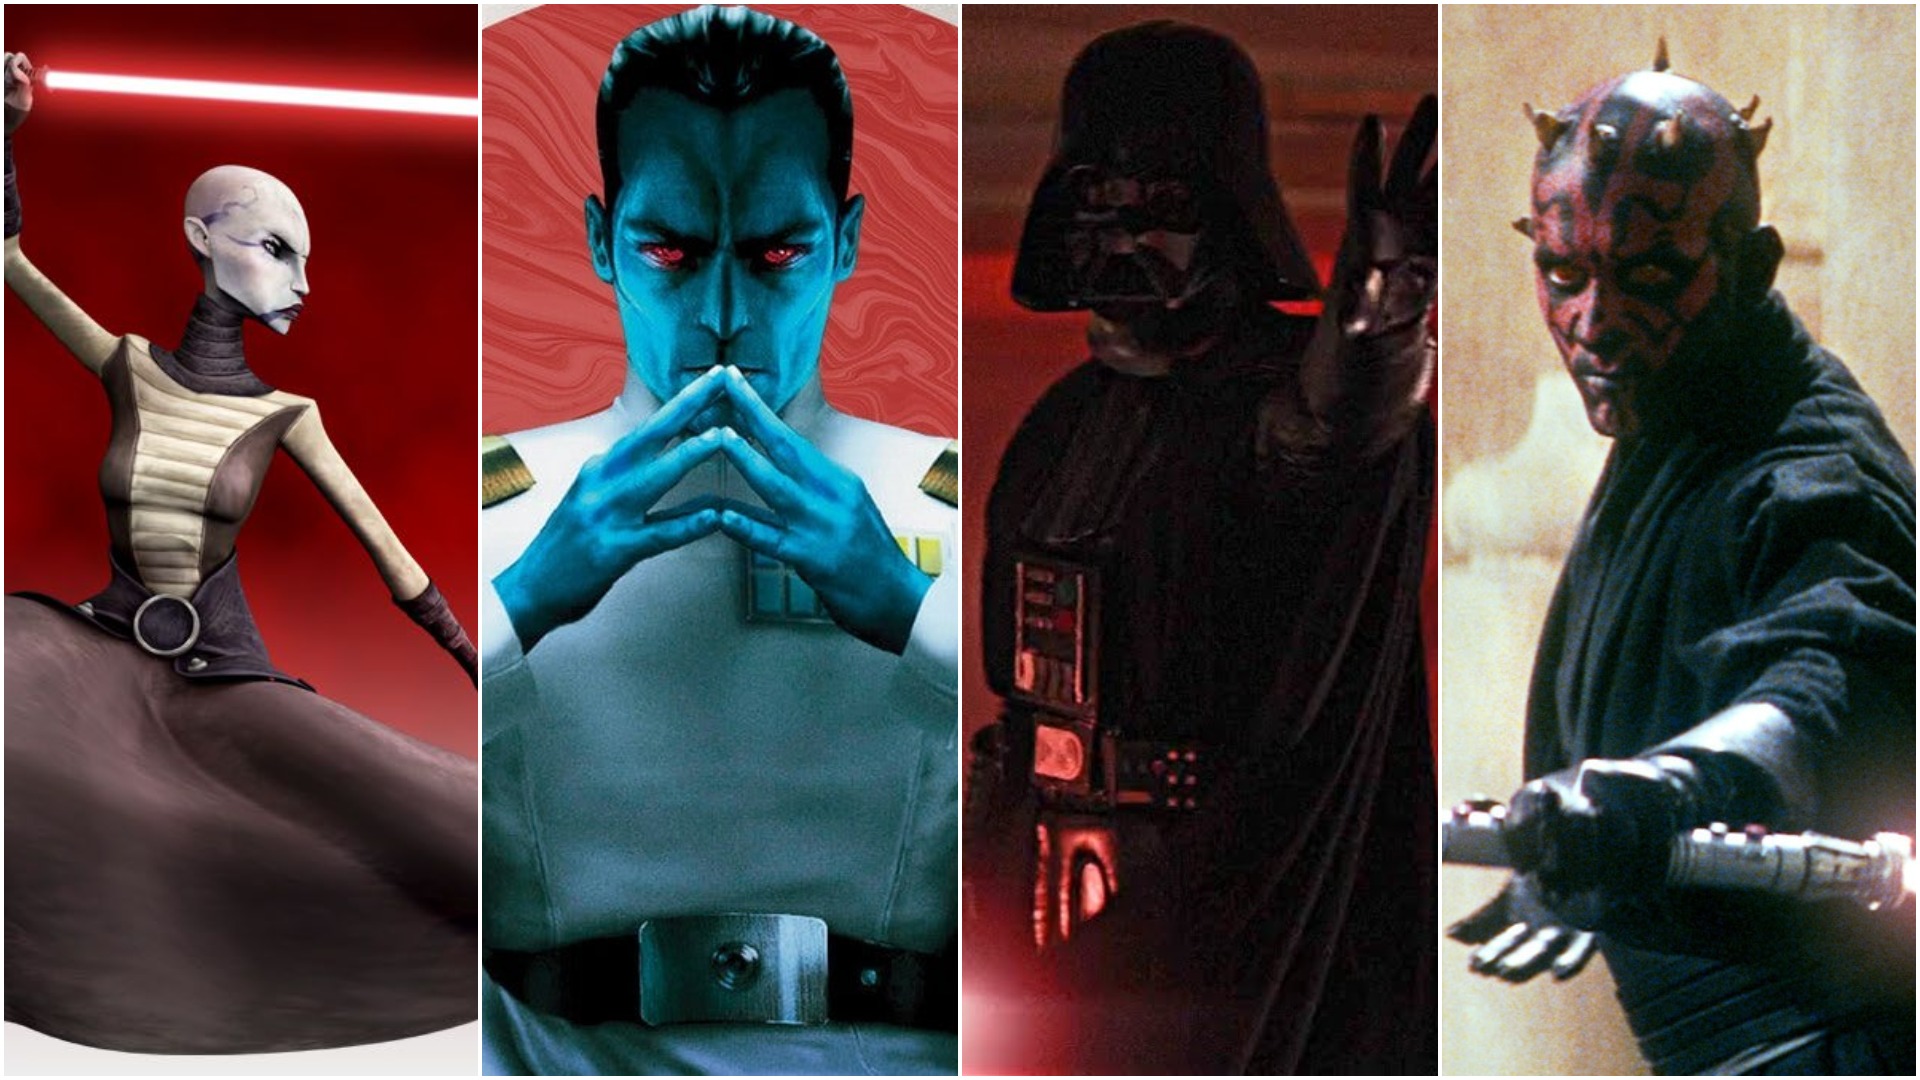 A Guide To Star Wars Myers-Briggs Types For Your Favorite Characters